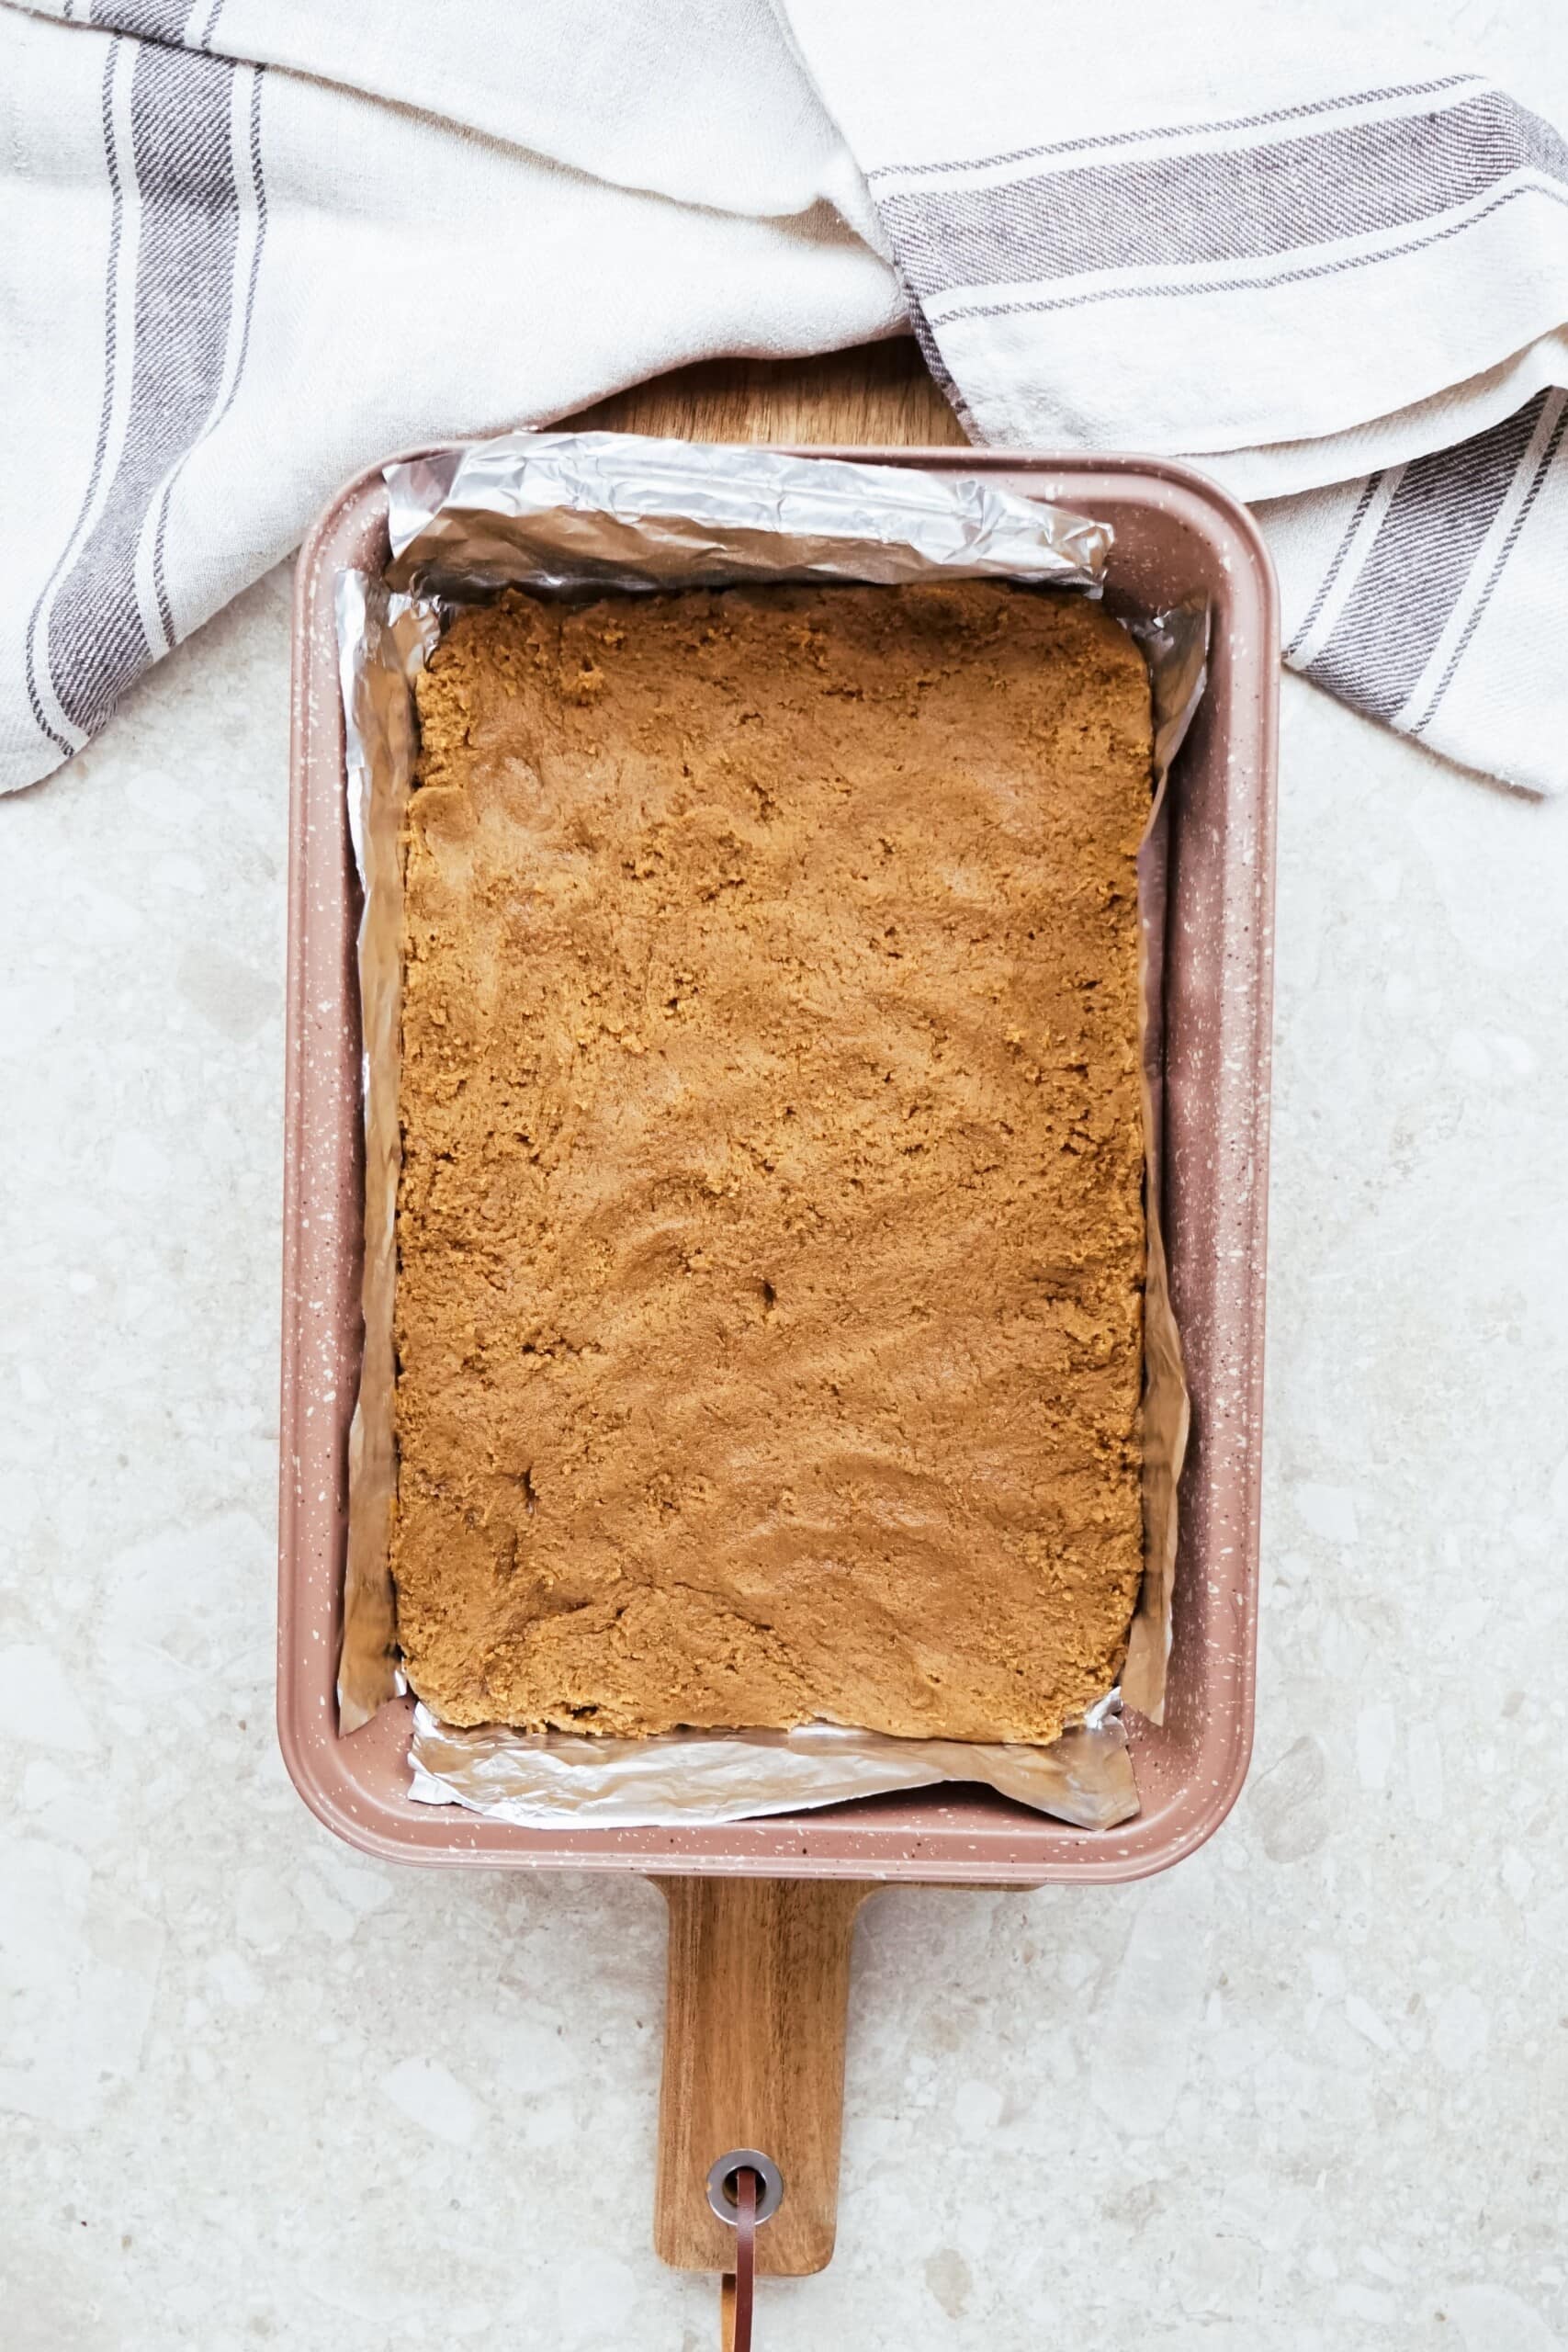 gingerbread dough in a pan spread out